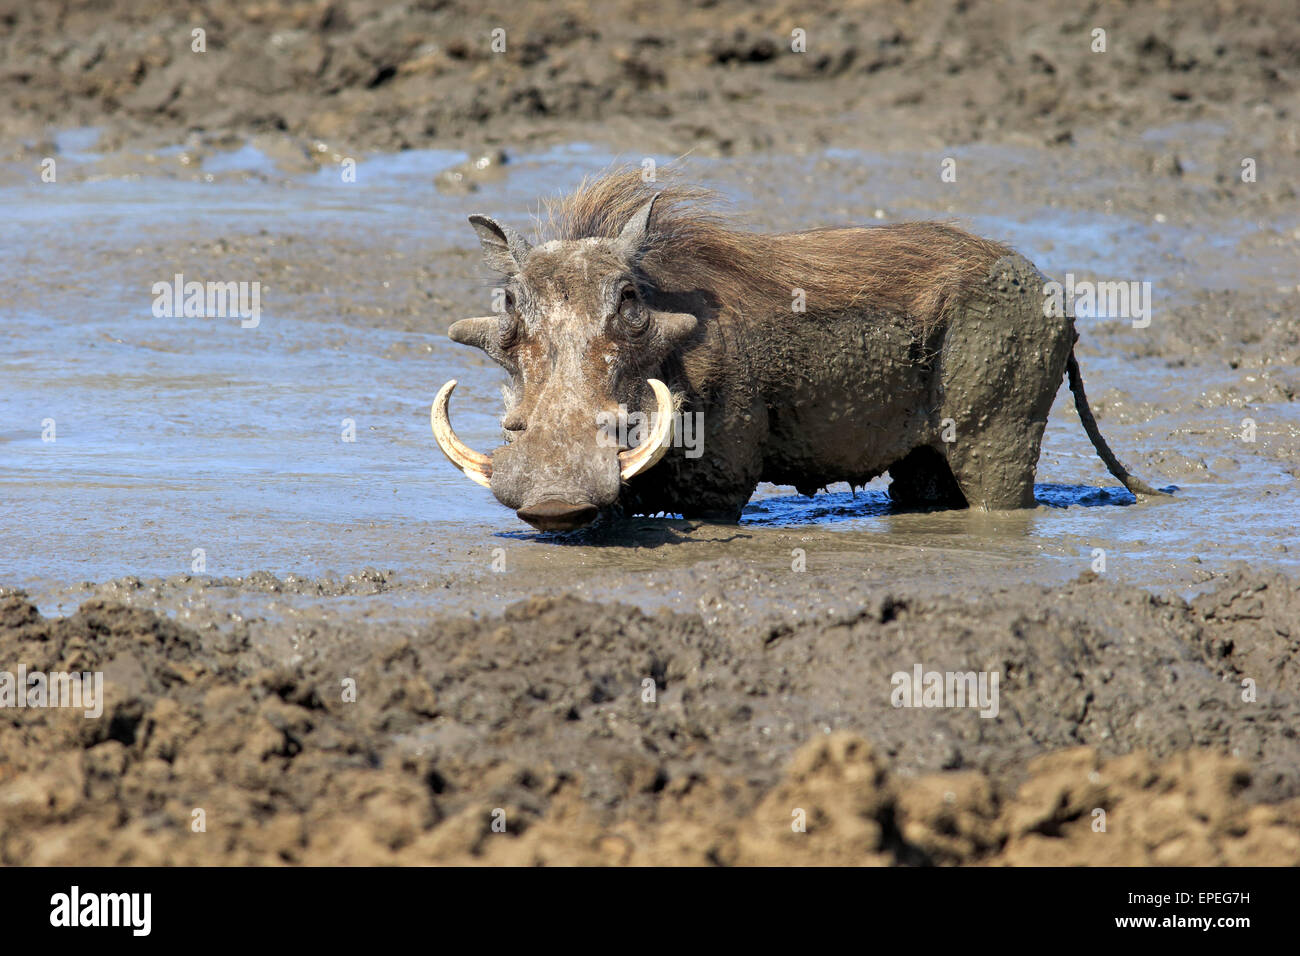 Warthog (Phacochoerus aethiopicus), adult, having a mud bath, Kruger National Park, South Africa Stock Photo